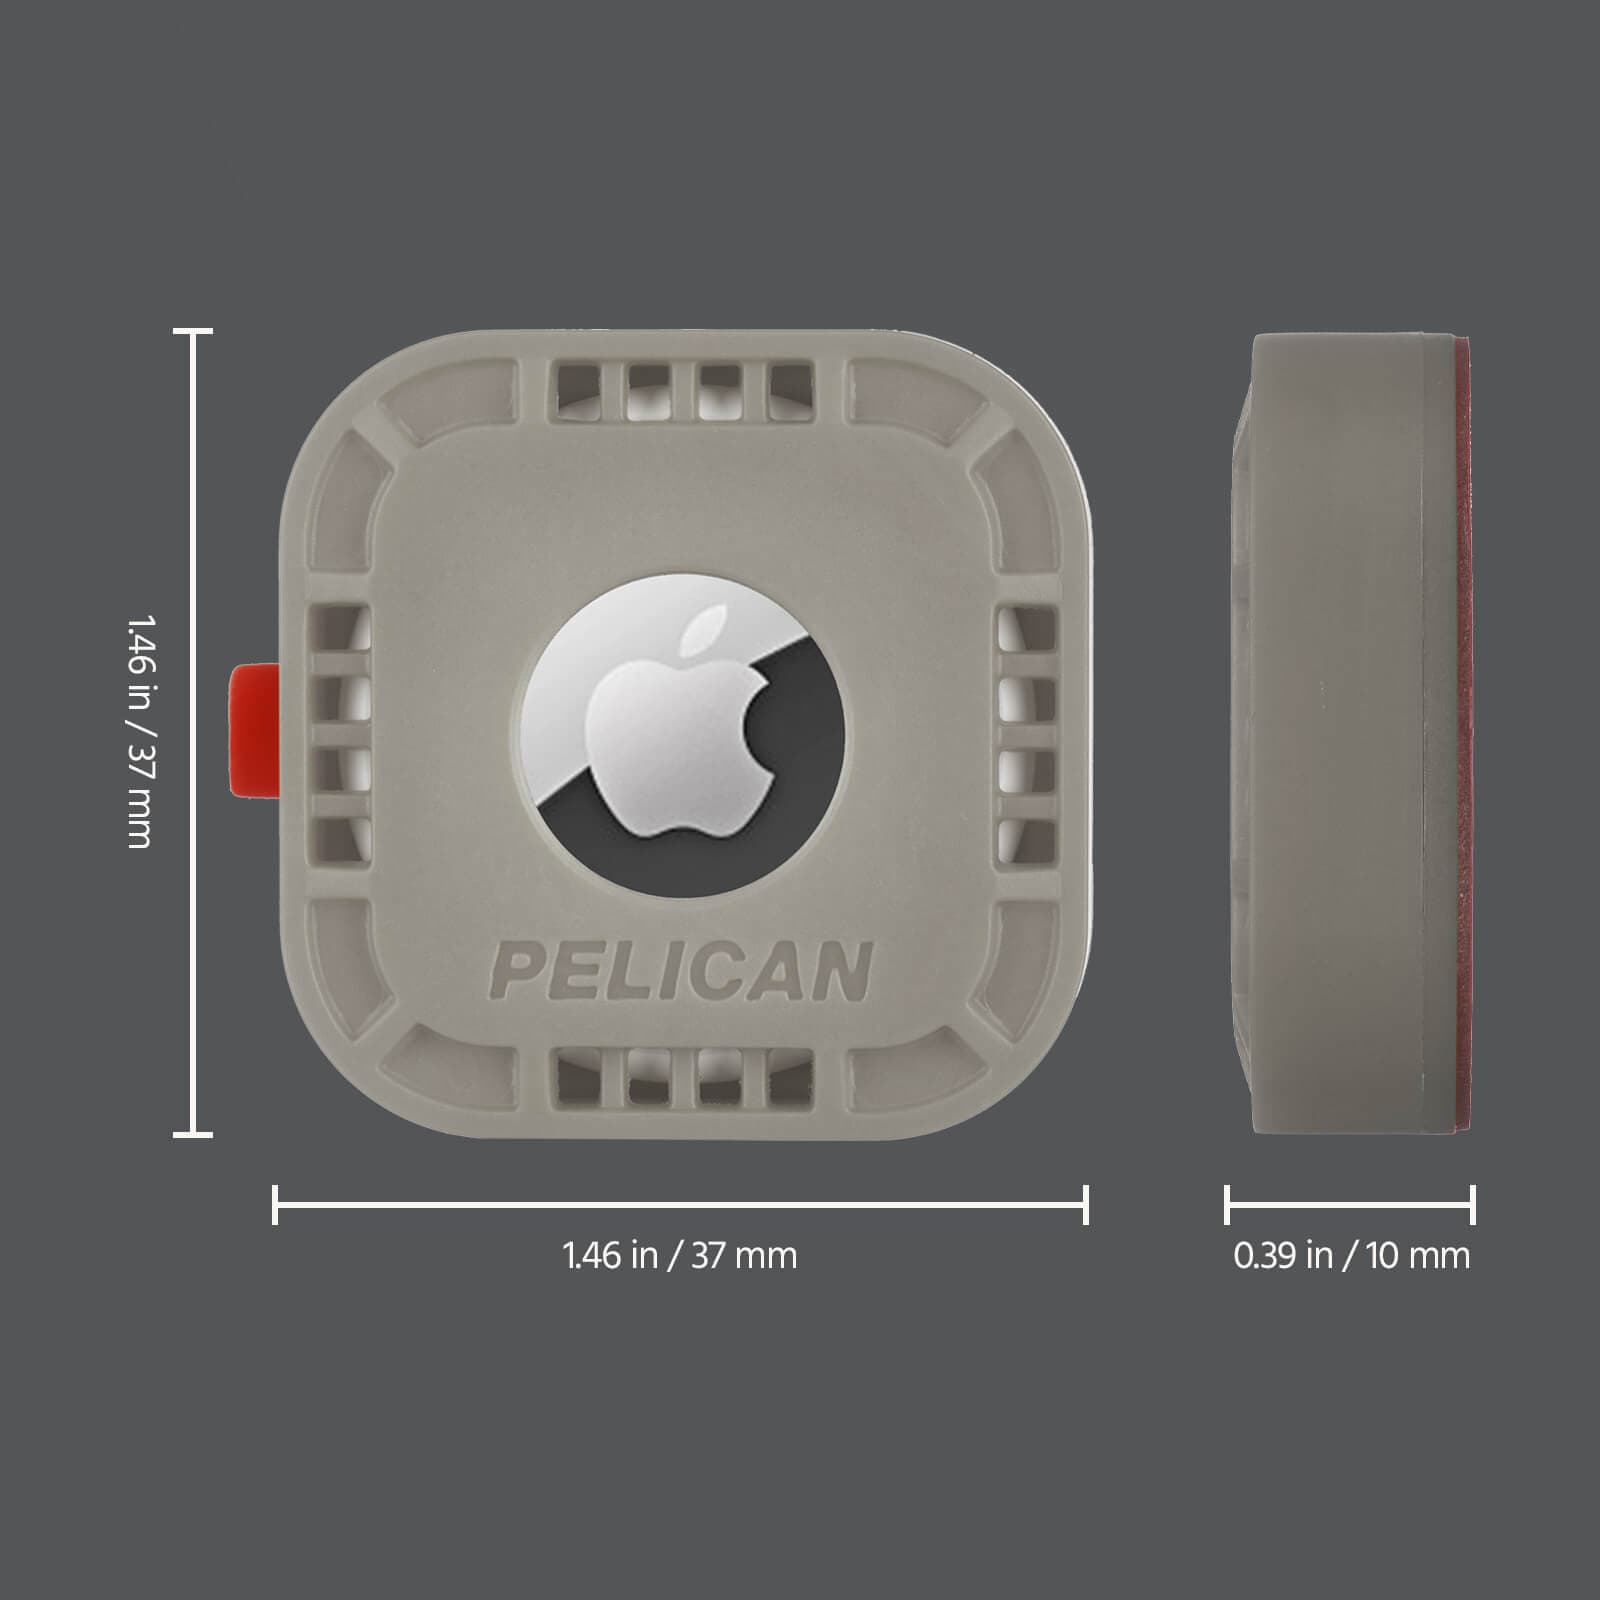 Pelican Protector AirTag Sticker Mount 4 Pack (Grey) - AirTag Case